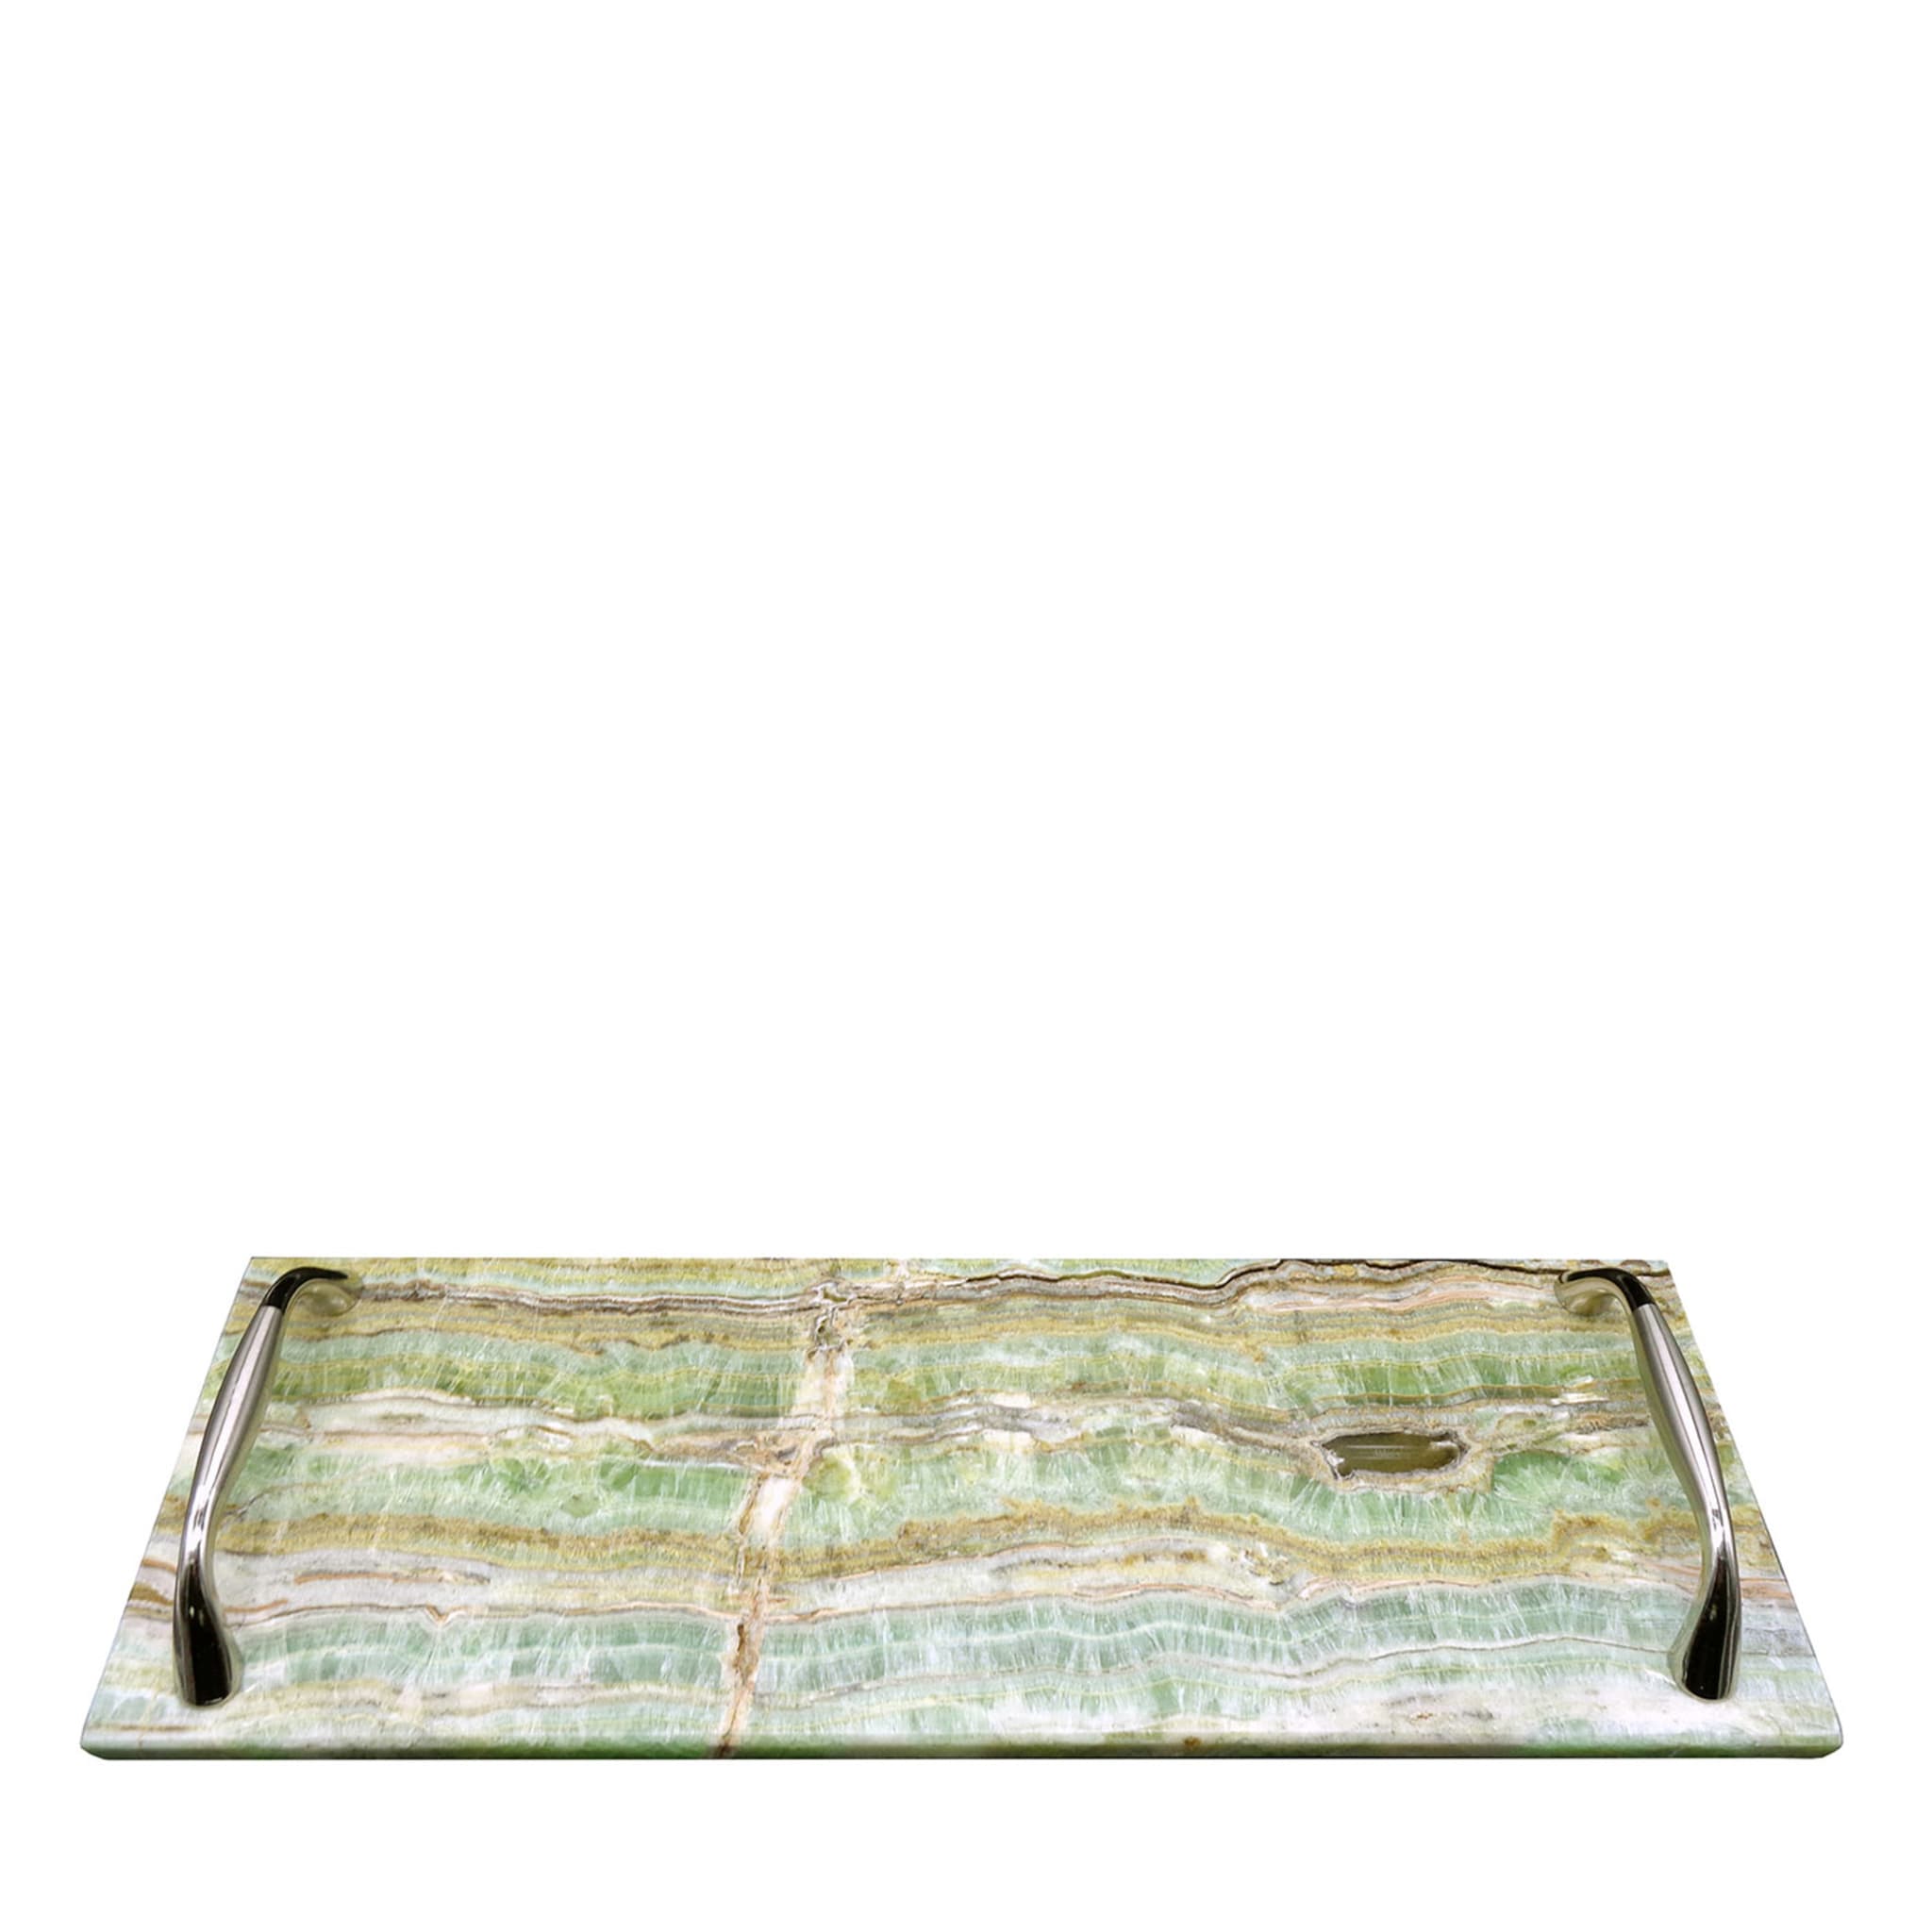 Rectangular Emerald Onyx Tray with Steel Handles #1 - Main view